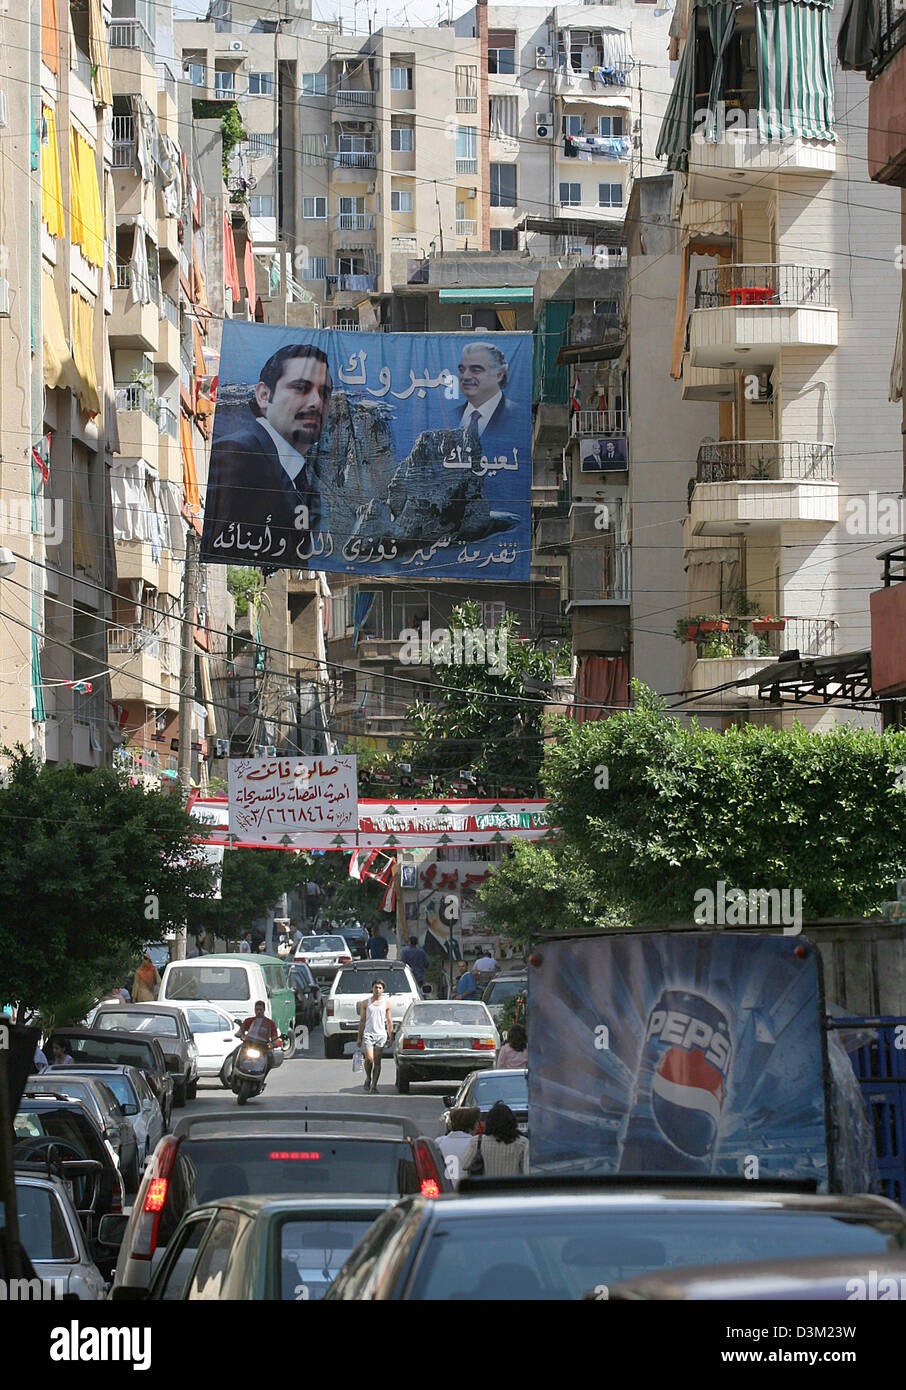 (dpa) - The picture shows a billboard of the murdered politician Rafik Hariri and his son Saad Hariri in a residential quarter in Beirut, Lebanon, 01 October 2005. Former Lebanese Prime Minister Hariri and 20 other people got killed in a bomb attack on 14 February 2005. Regarding to a UN report publicised on 21 October 2005, Syrian security forces were involved in the assassination Stock Photo